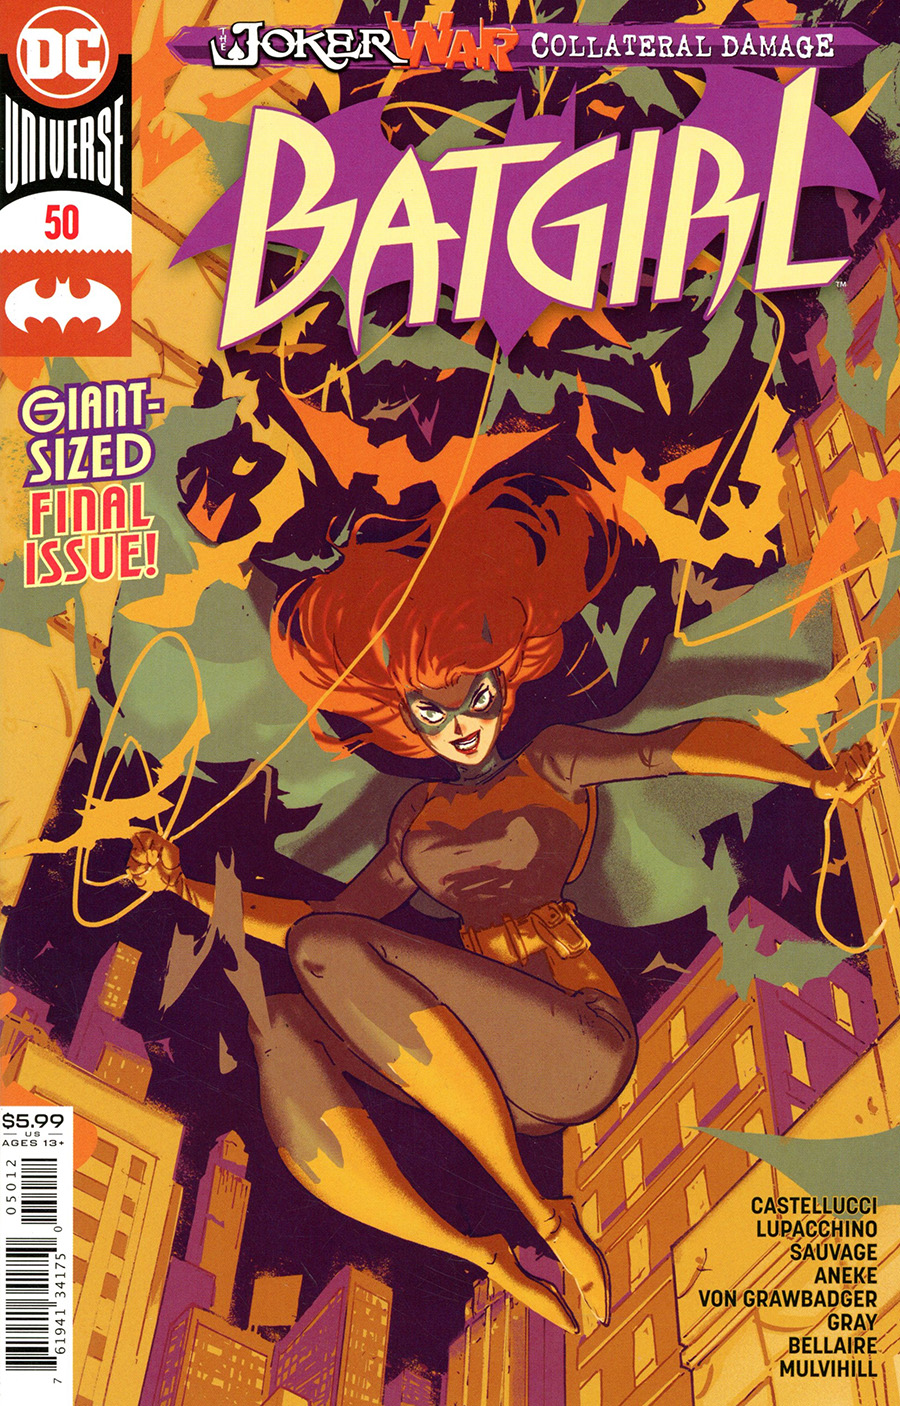 Batgirl Vol 5 #50 Cover C 2nd Ptg Riley Rossmo Variant Cover (Joker War Fallout Tie-In)